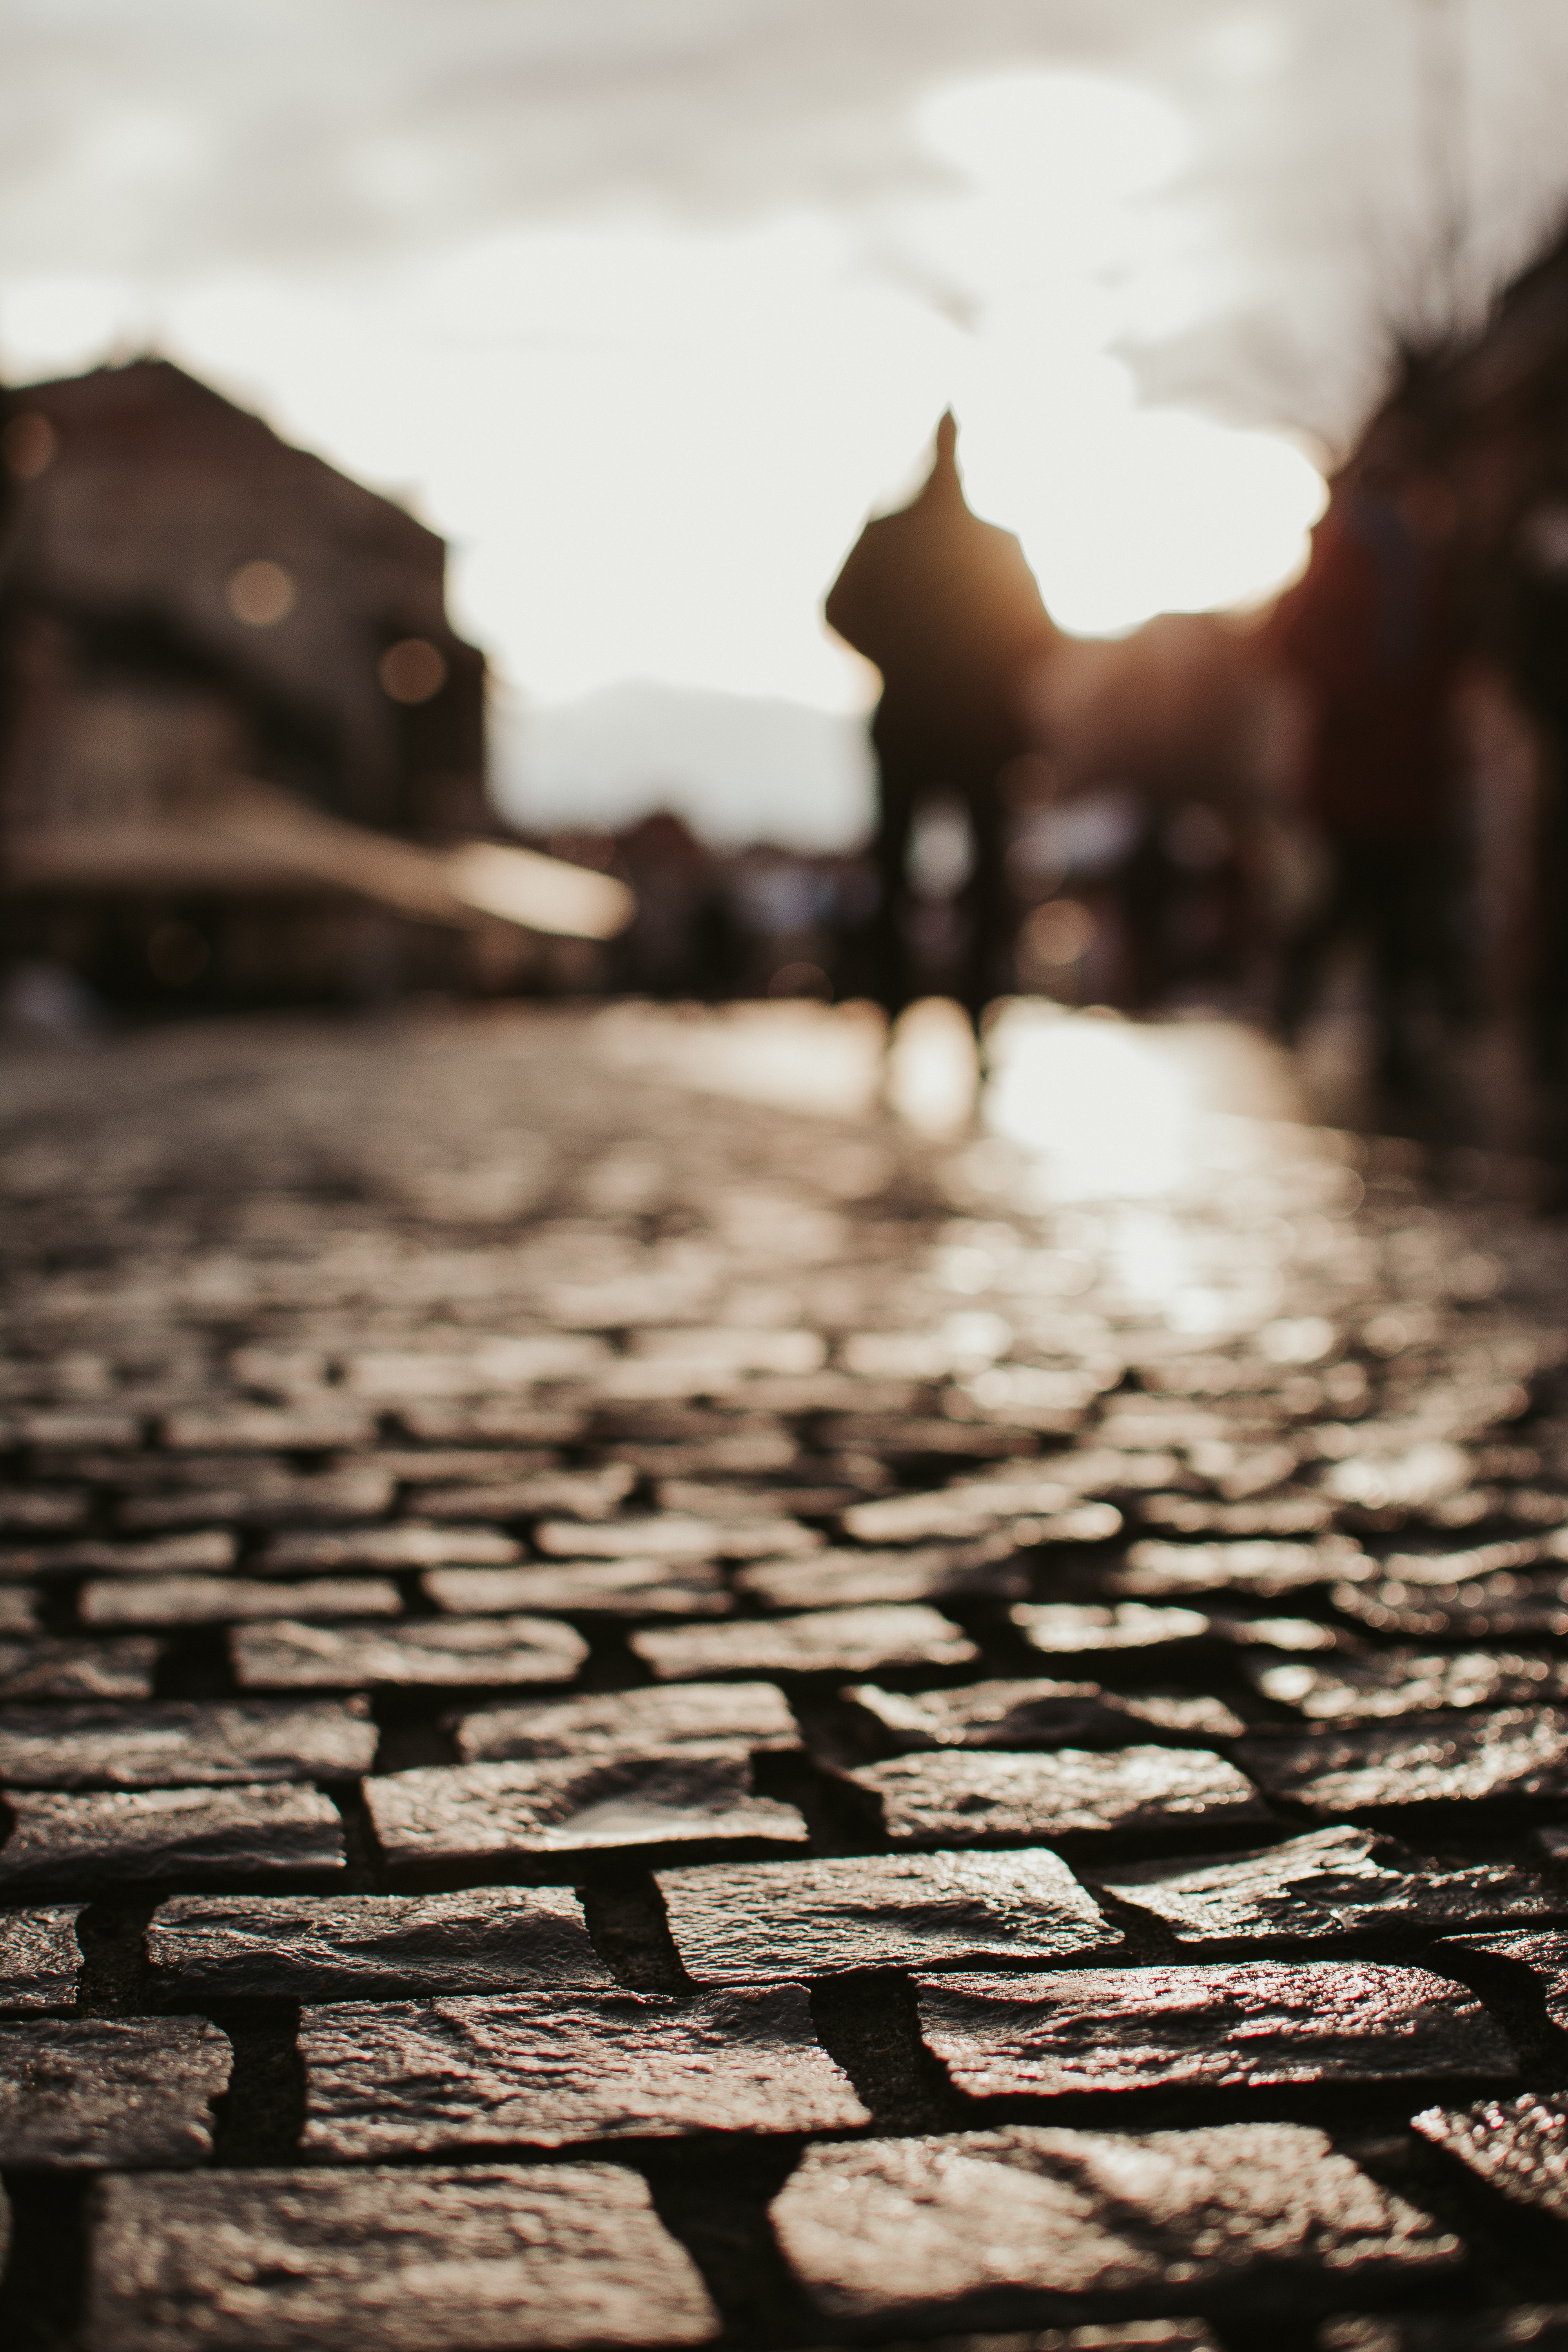 A photo of a person in the distance, appearing to be walking toward tome buildings on a dimly-lit day. The photo is taken from a distance and focuses on the cobblestone pavement the person is walking on in the foreground, rendering the person and the background into blurry silhouettes.